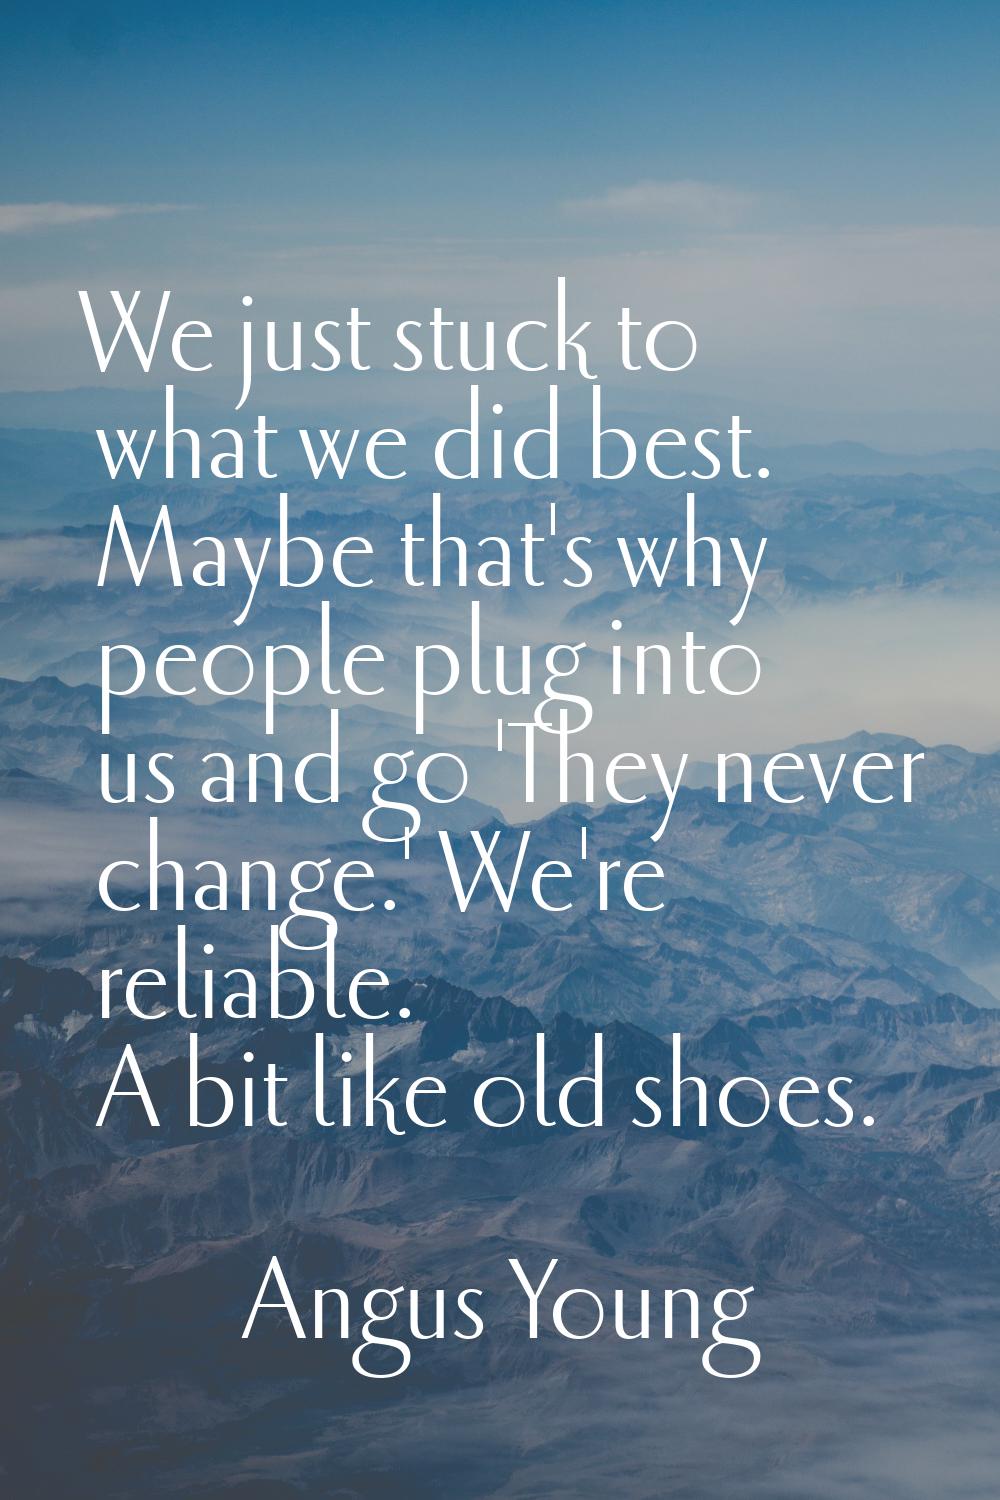 We just stuck to what we did best. Maybe that's why people plug into us and go 'They never change.'